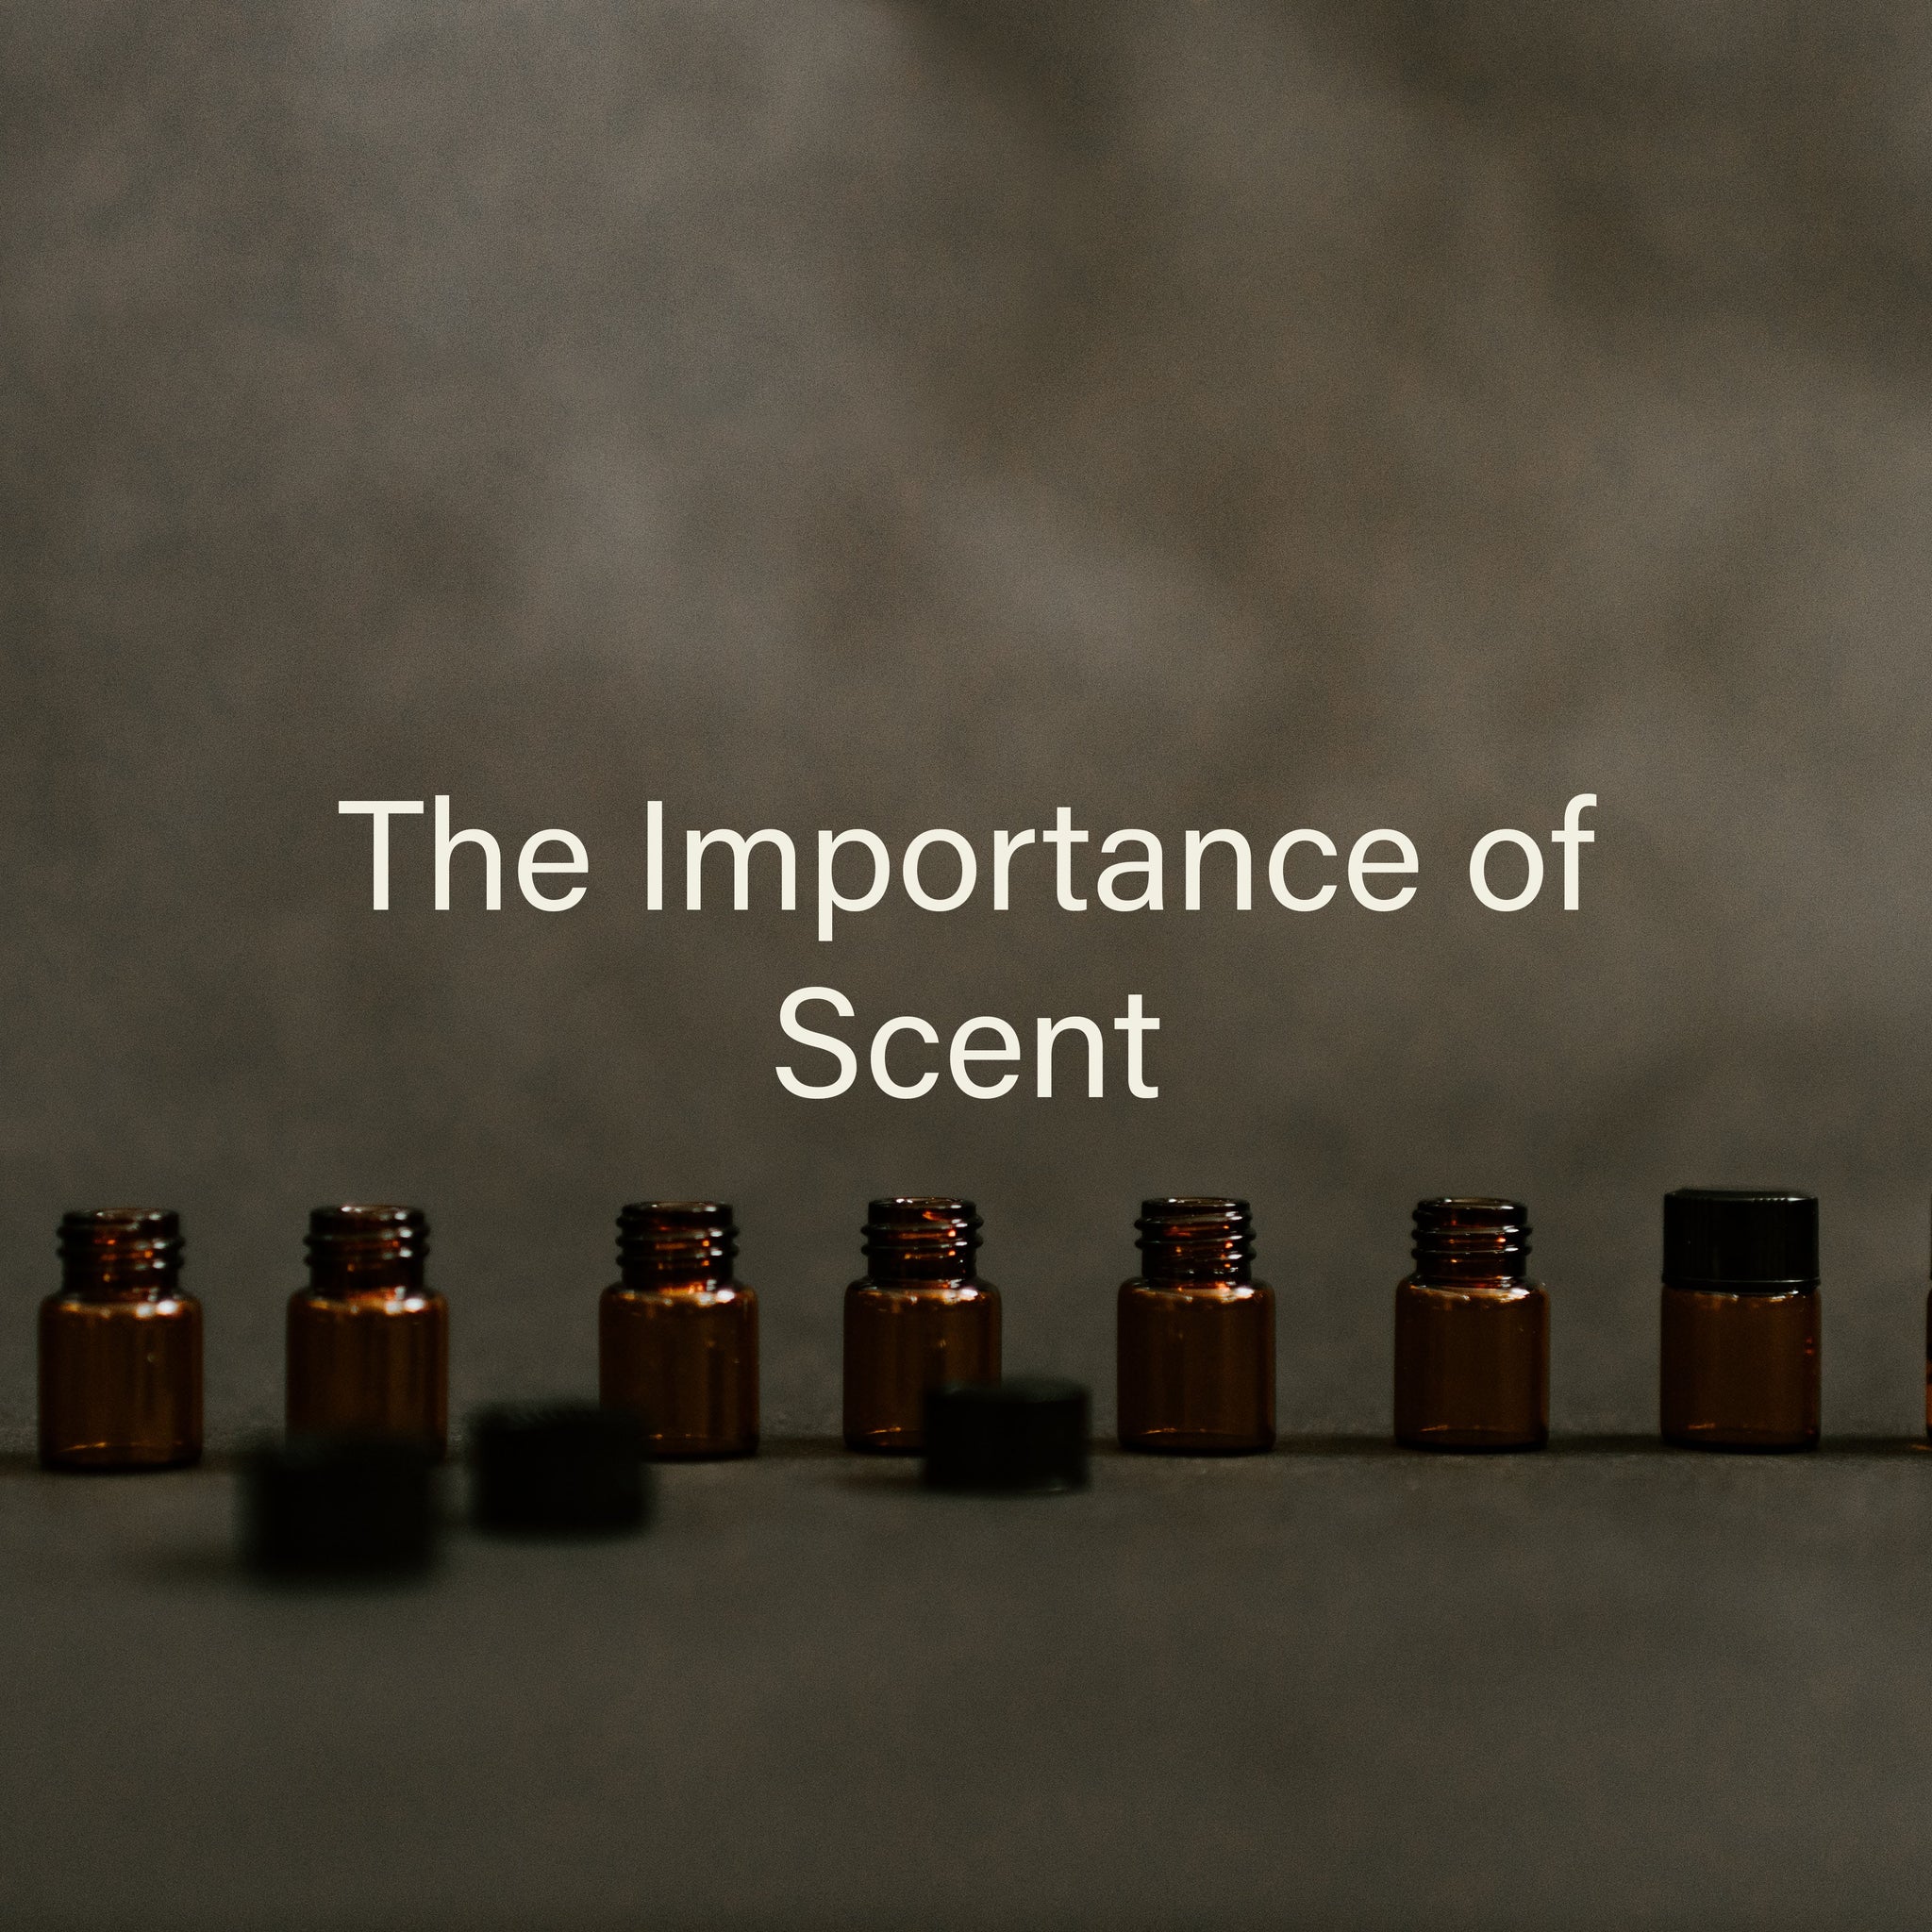 The Importance of Scent